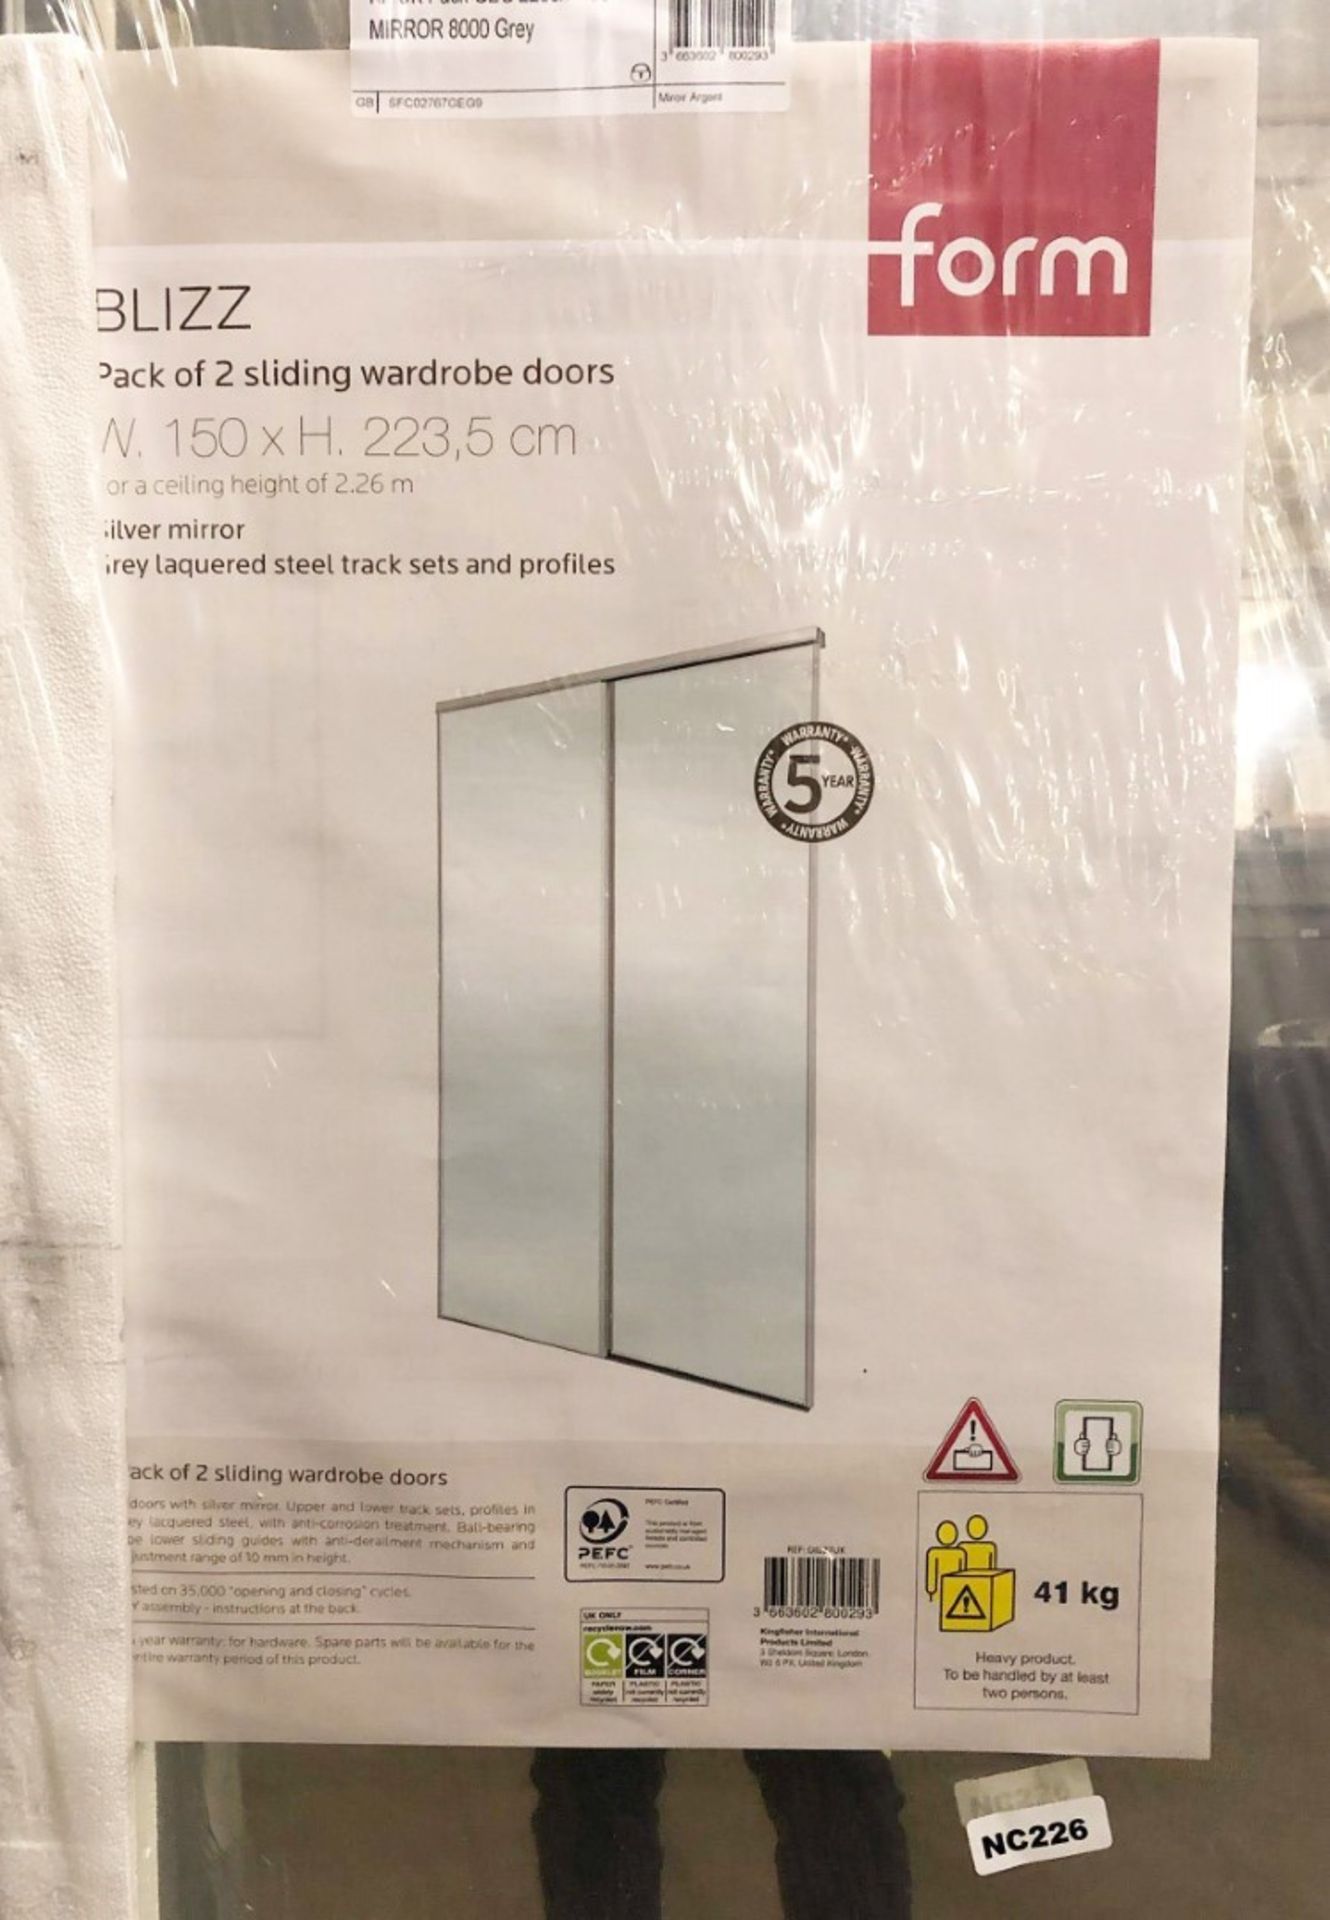 1 x BLIZZ Pack of 2 Sliding Wardrobe Doors With A Silver Mirror With a Grey Lacquered Steel Track Se - Image 4 of 5